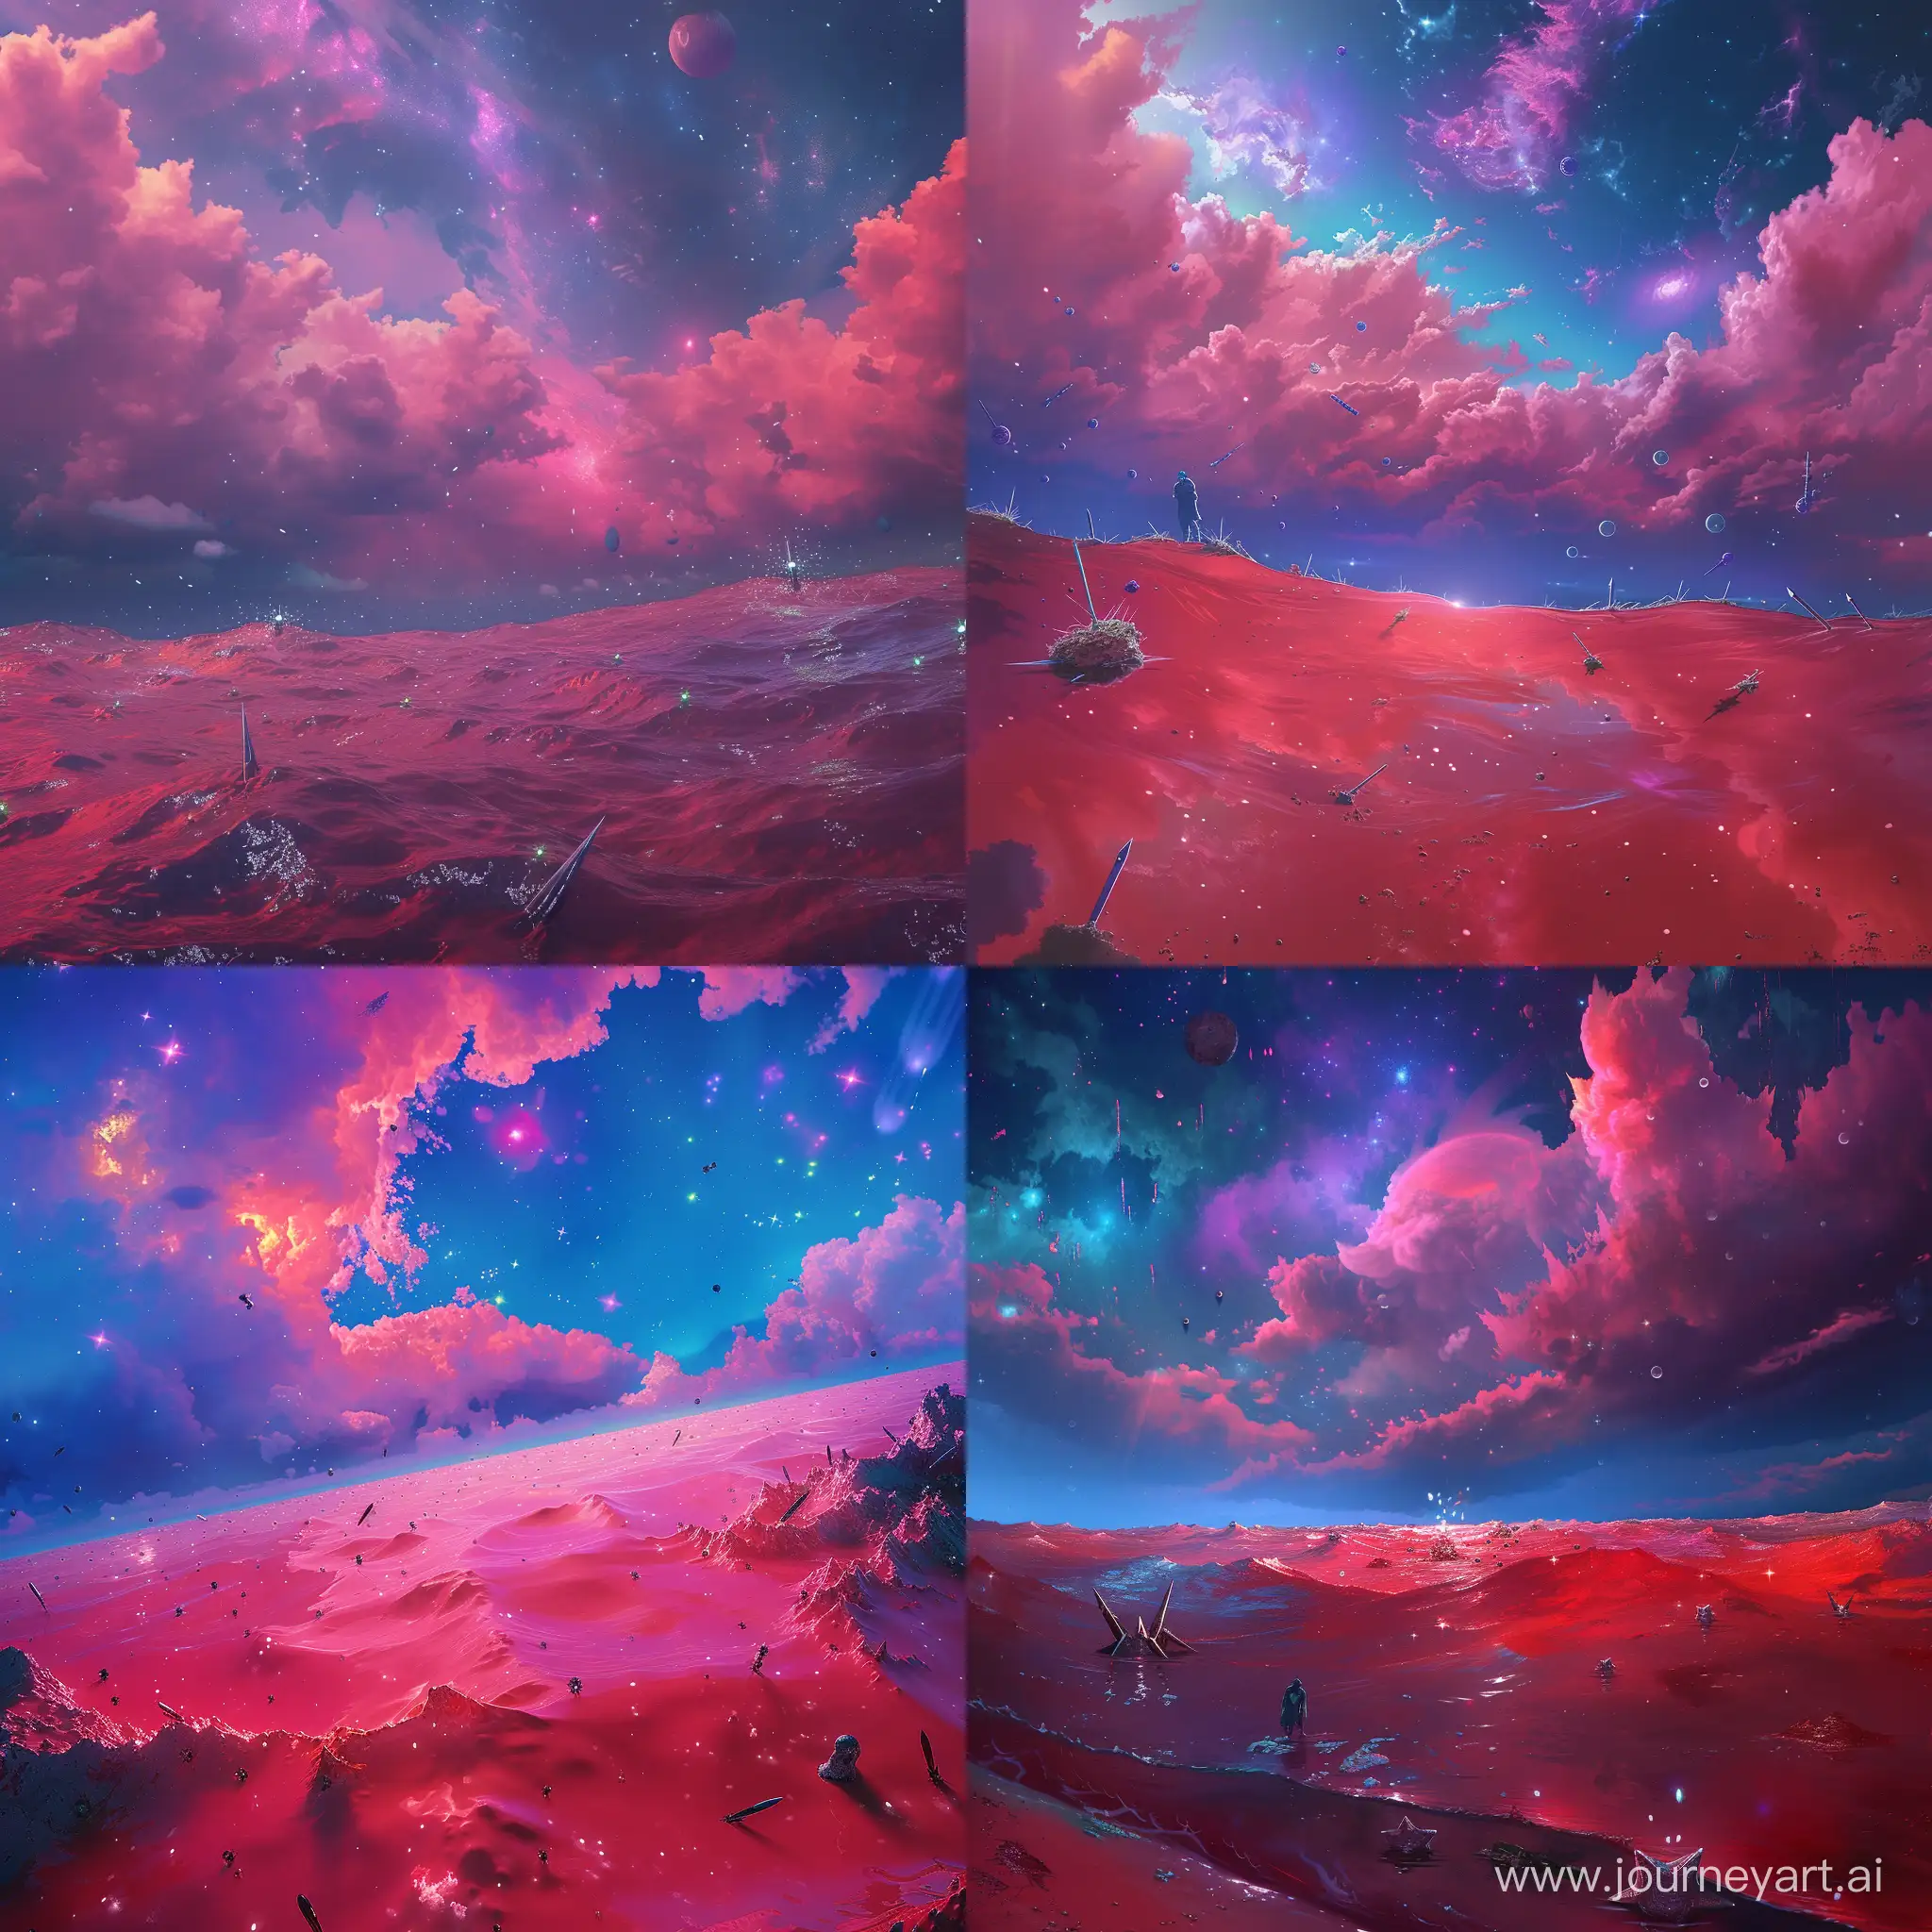 Combining your prompts, envision a surreal masterpiece of a scene featuring a remote corner of an unnamed planet, where a figure explores the depths of the ocean and is captivated by the breathtaking sight of a pink-hued sky above, with nebulous clouds and vibrant colors. The ethereal display beneath the surface, adorned with stars and sharp objects floating in the water, creates a mesmerizing and unsettling atmosphere, as the undulating ground evokes disorientation, creating a sense of being lost in a vast, limitless world. A cold, isolation vibe resonates as the underwater world is drenched in a deep, bloody red theme, exuding a profound sadness that captures the feeling of sickness and dying inside of nature. The surreal ambiance is enhanced by the otherworldly red tinge in parts of the water, leaving observers spellbound by the perfection and splendor of this underwater world. The sky above is a deep midnight blue, adorned with cosmic elements that create an otherworldly beauty, with magnificent, enormous celestial bodies shimmering in captivating shades of beautiful purples and indigos, imparting a high cosmical element that adds to the surrealism of the scene --q 4